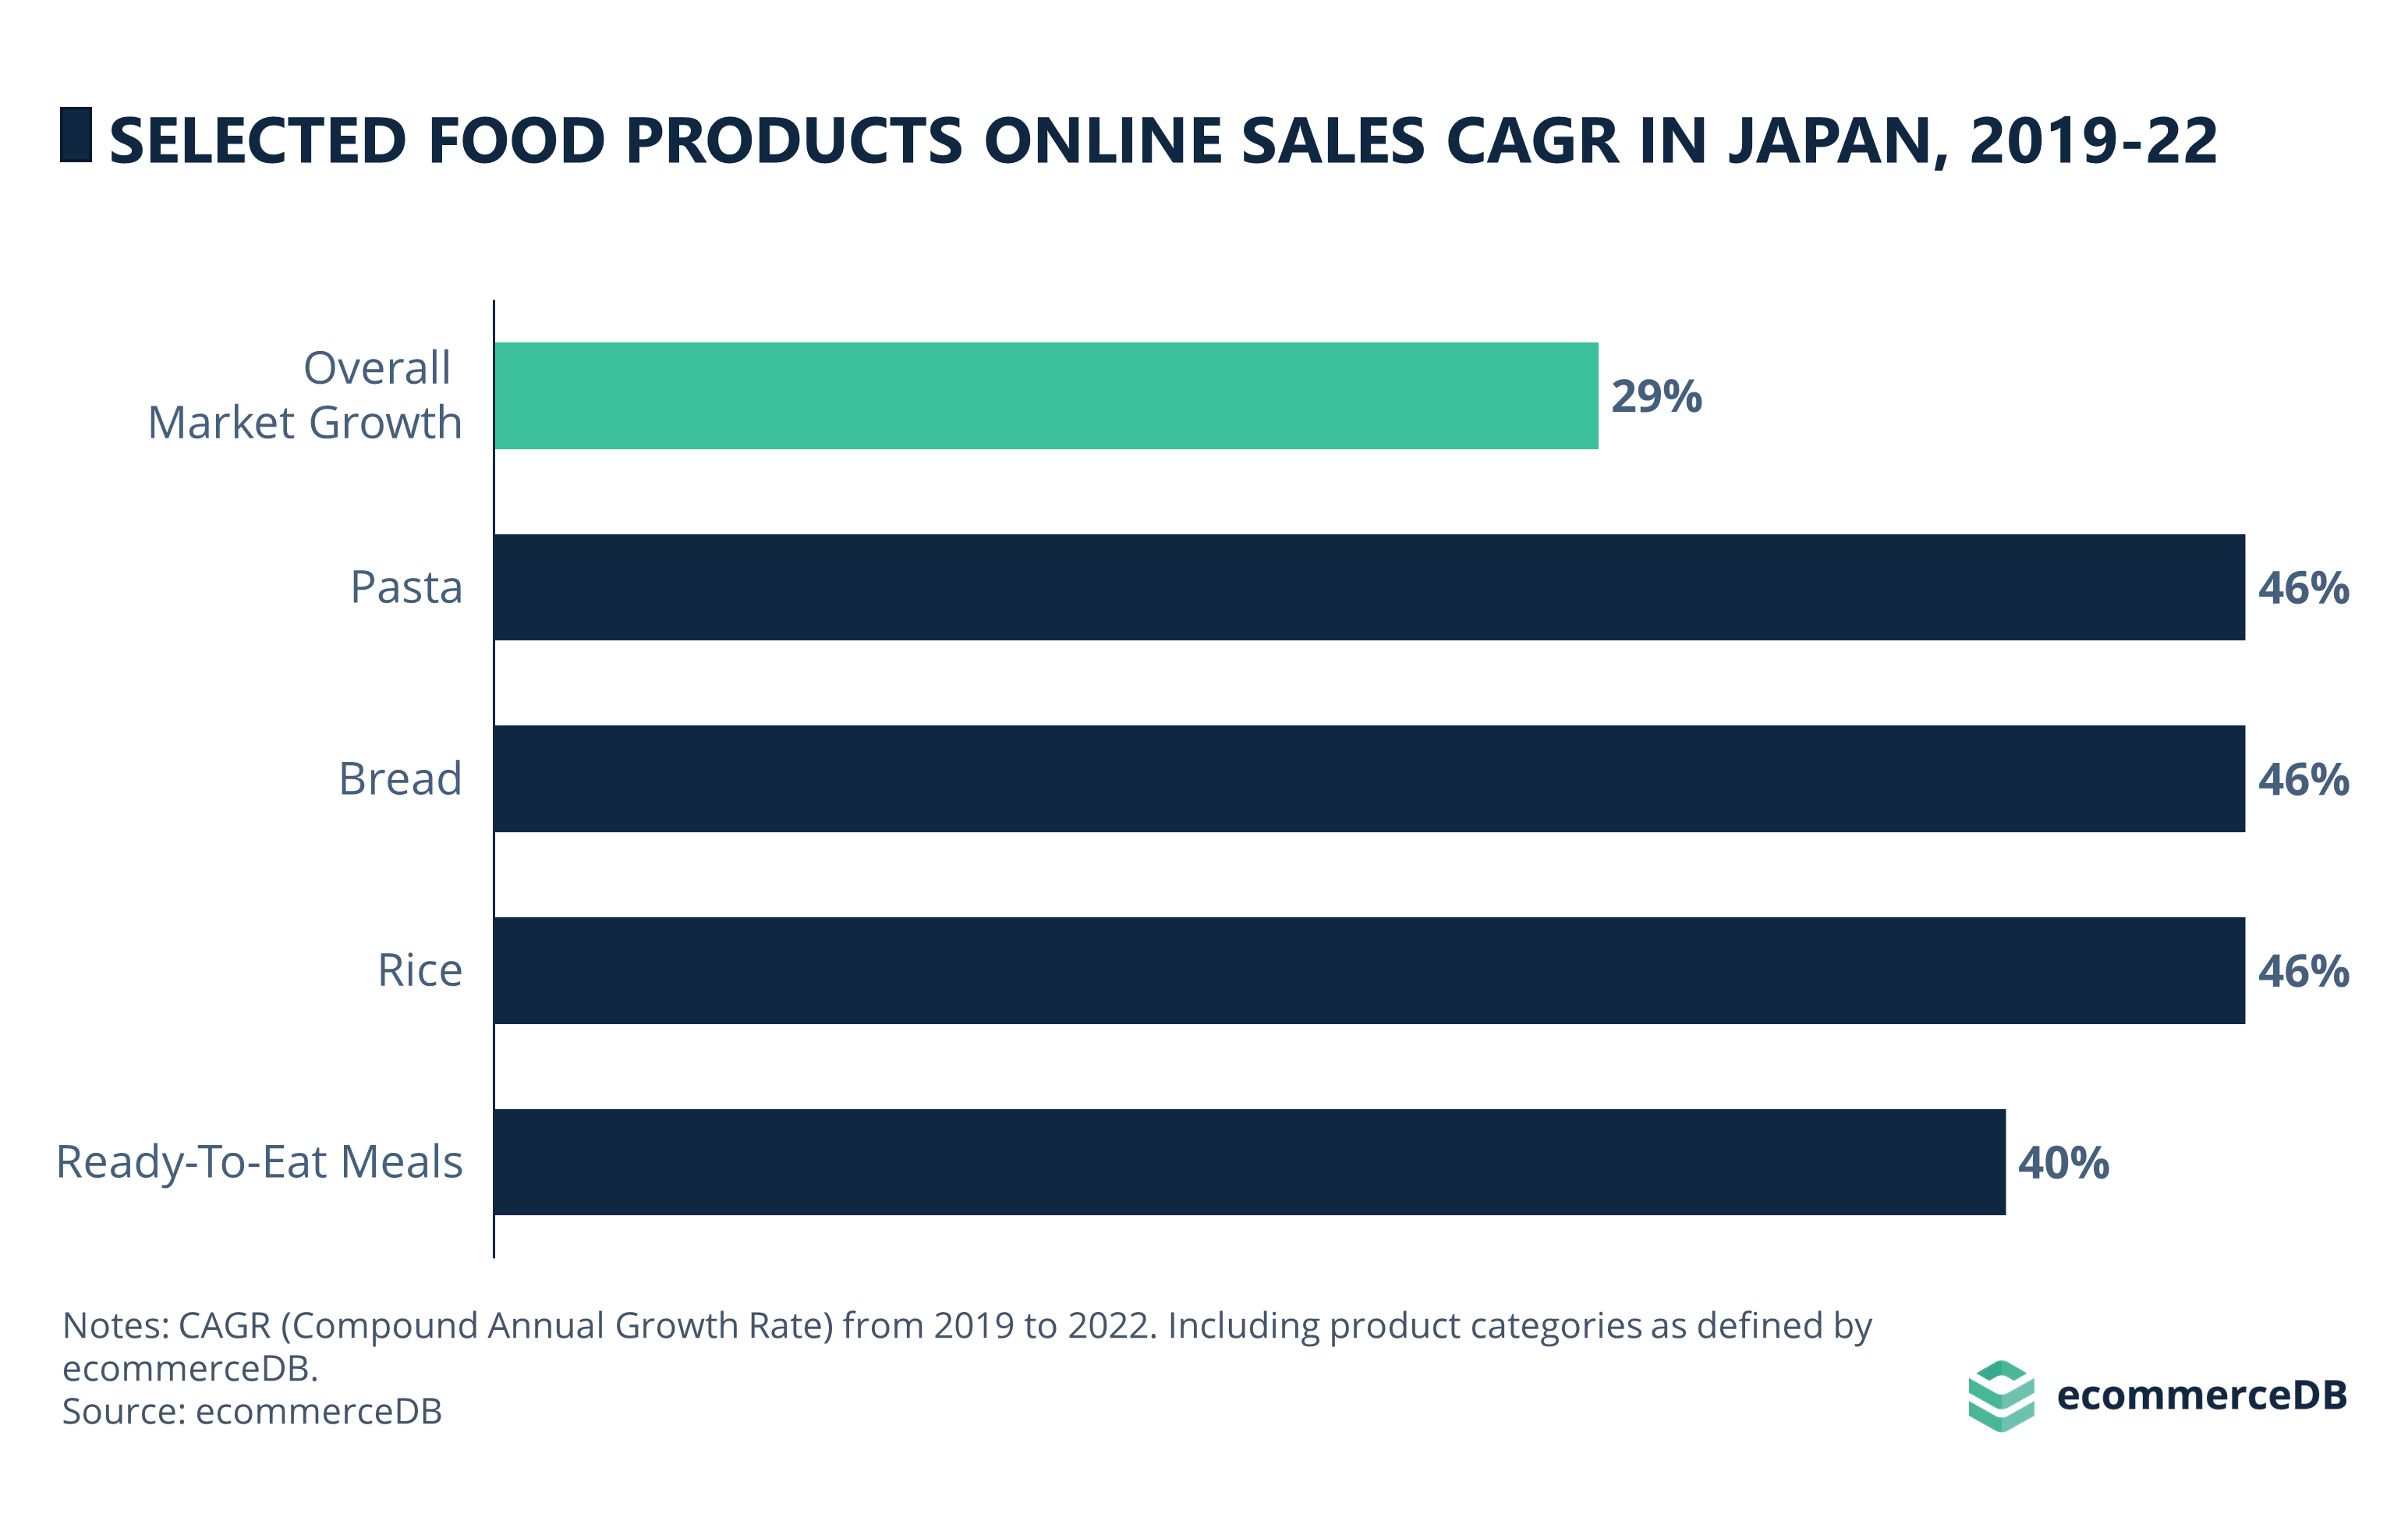 Convenience & Other Food Online Sales CAGR (19-22) in Japan